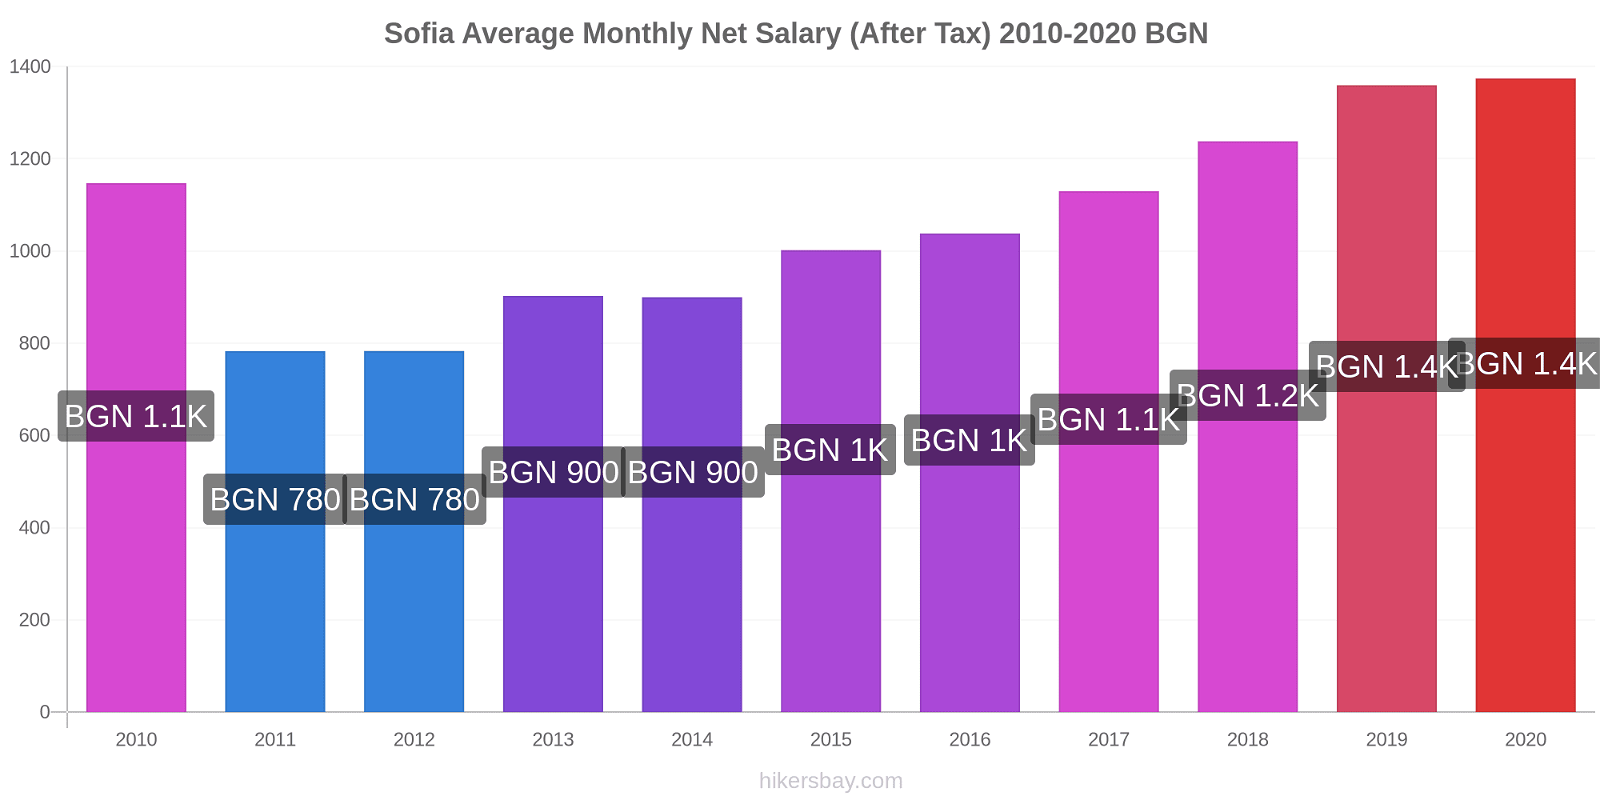 Sofia price changes Average Monthly Net Salary (After Tax) hikersbay.com